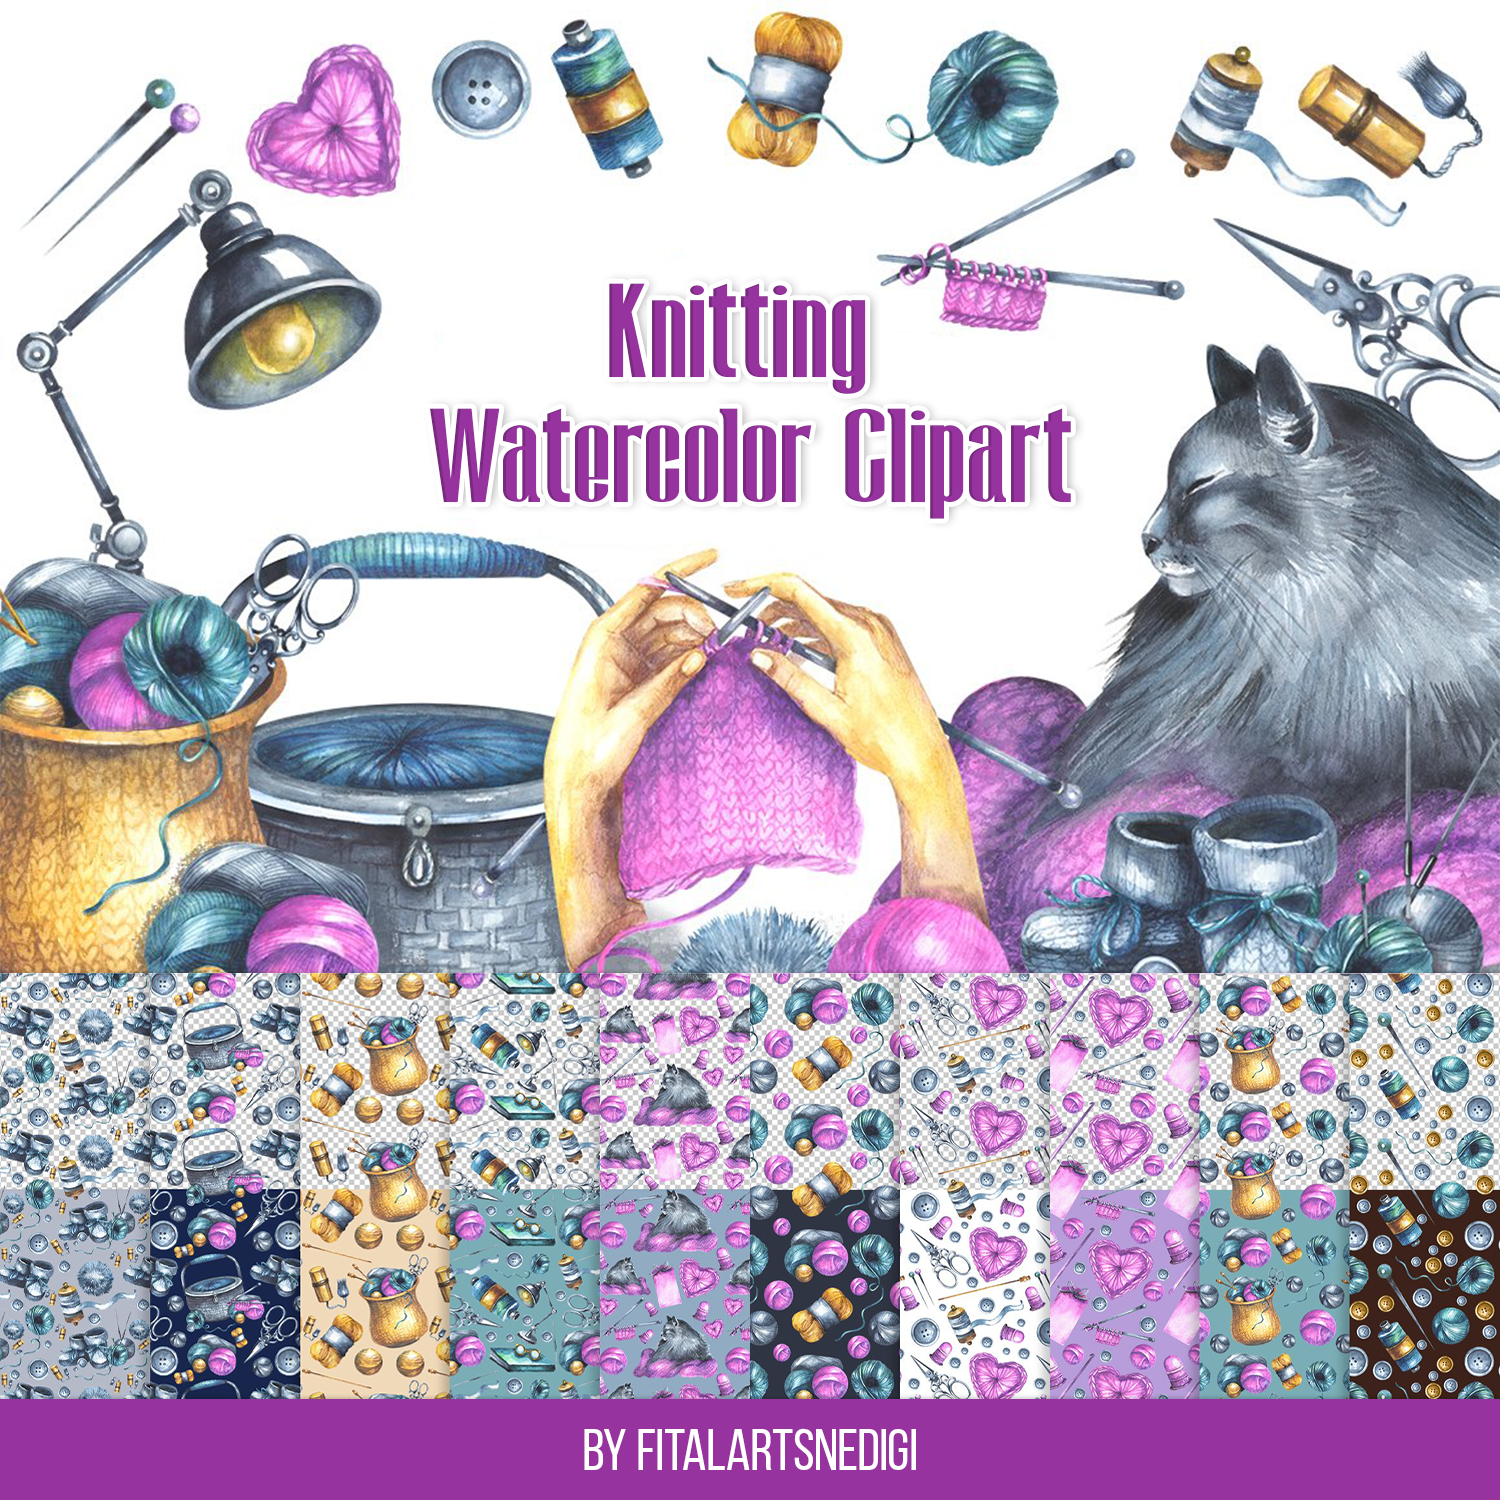 Knitting watercolor clipart for facebook.